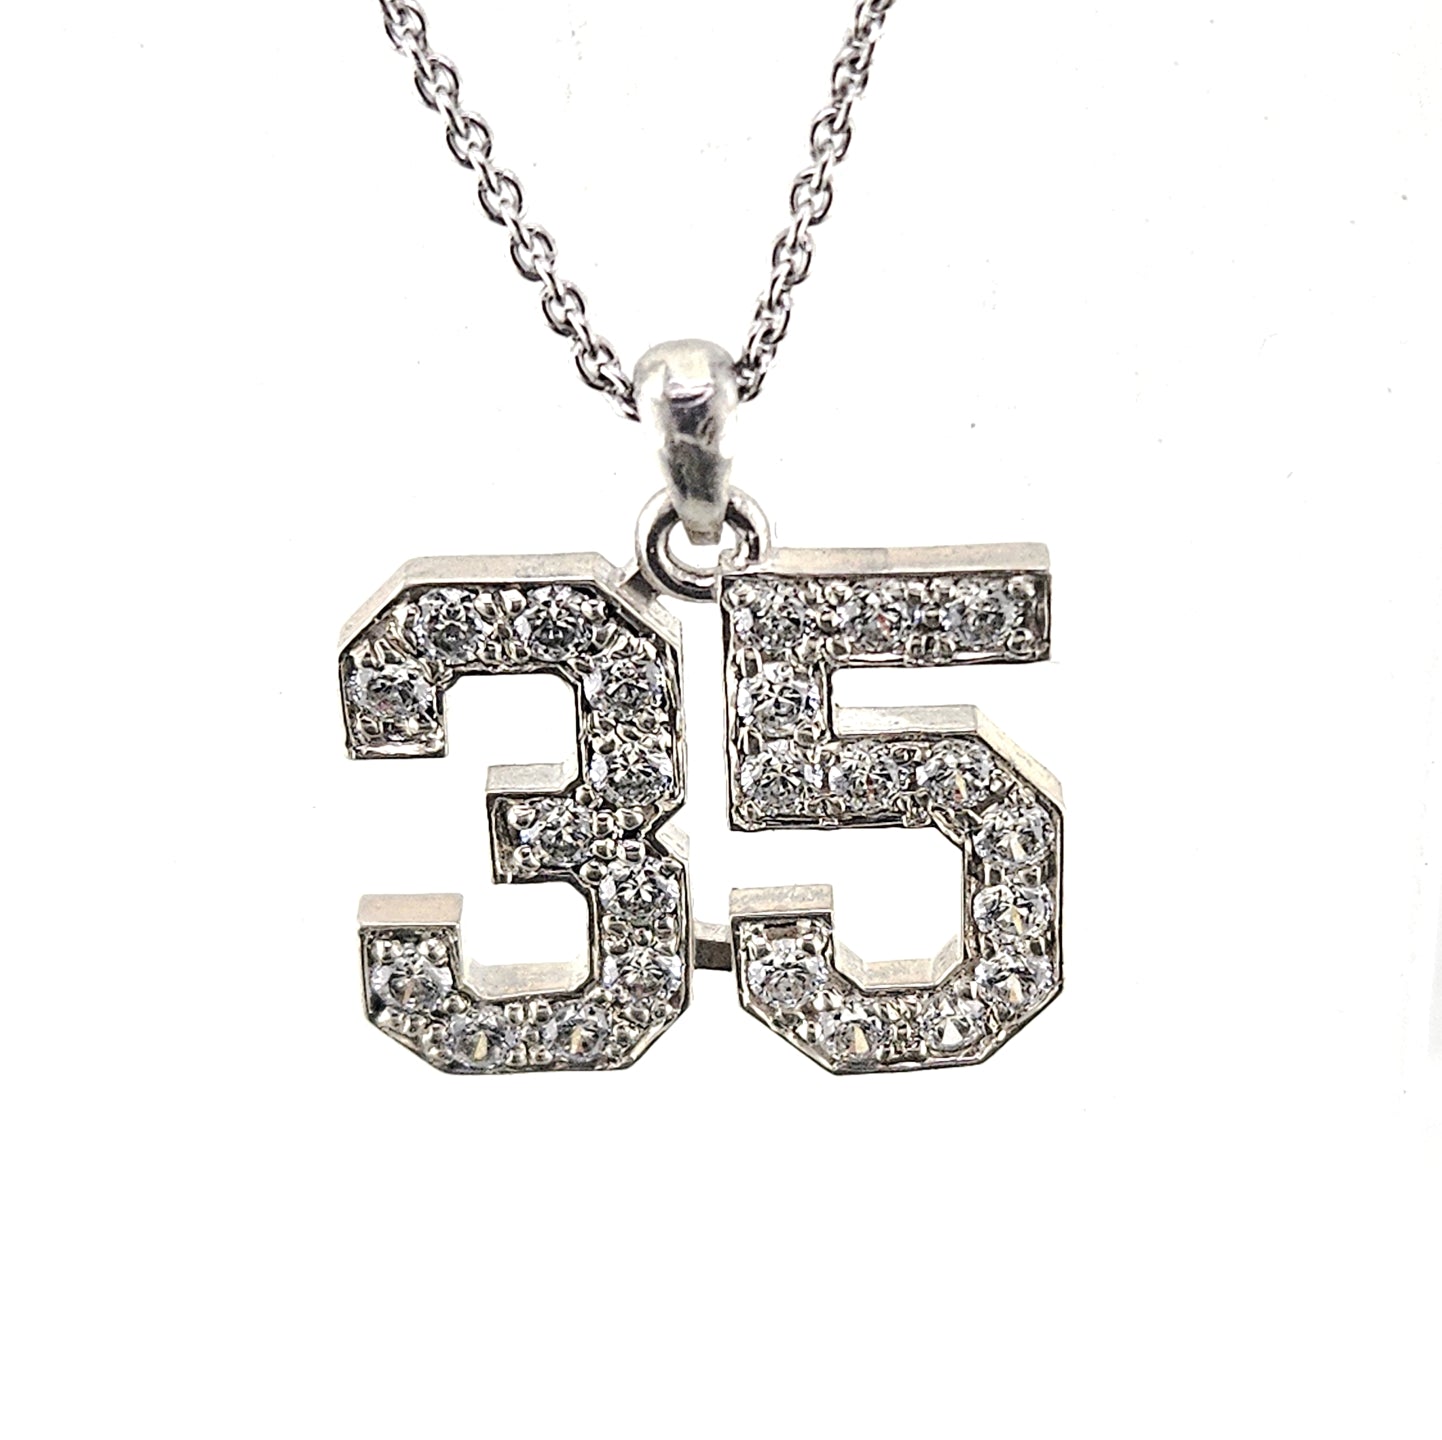 Diamond and Sterling Silver Number Pendant